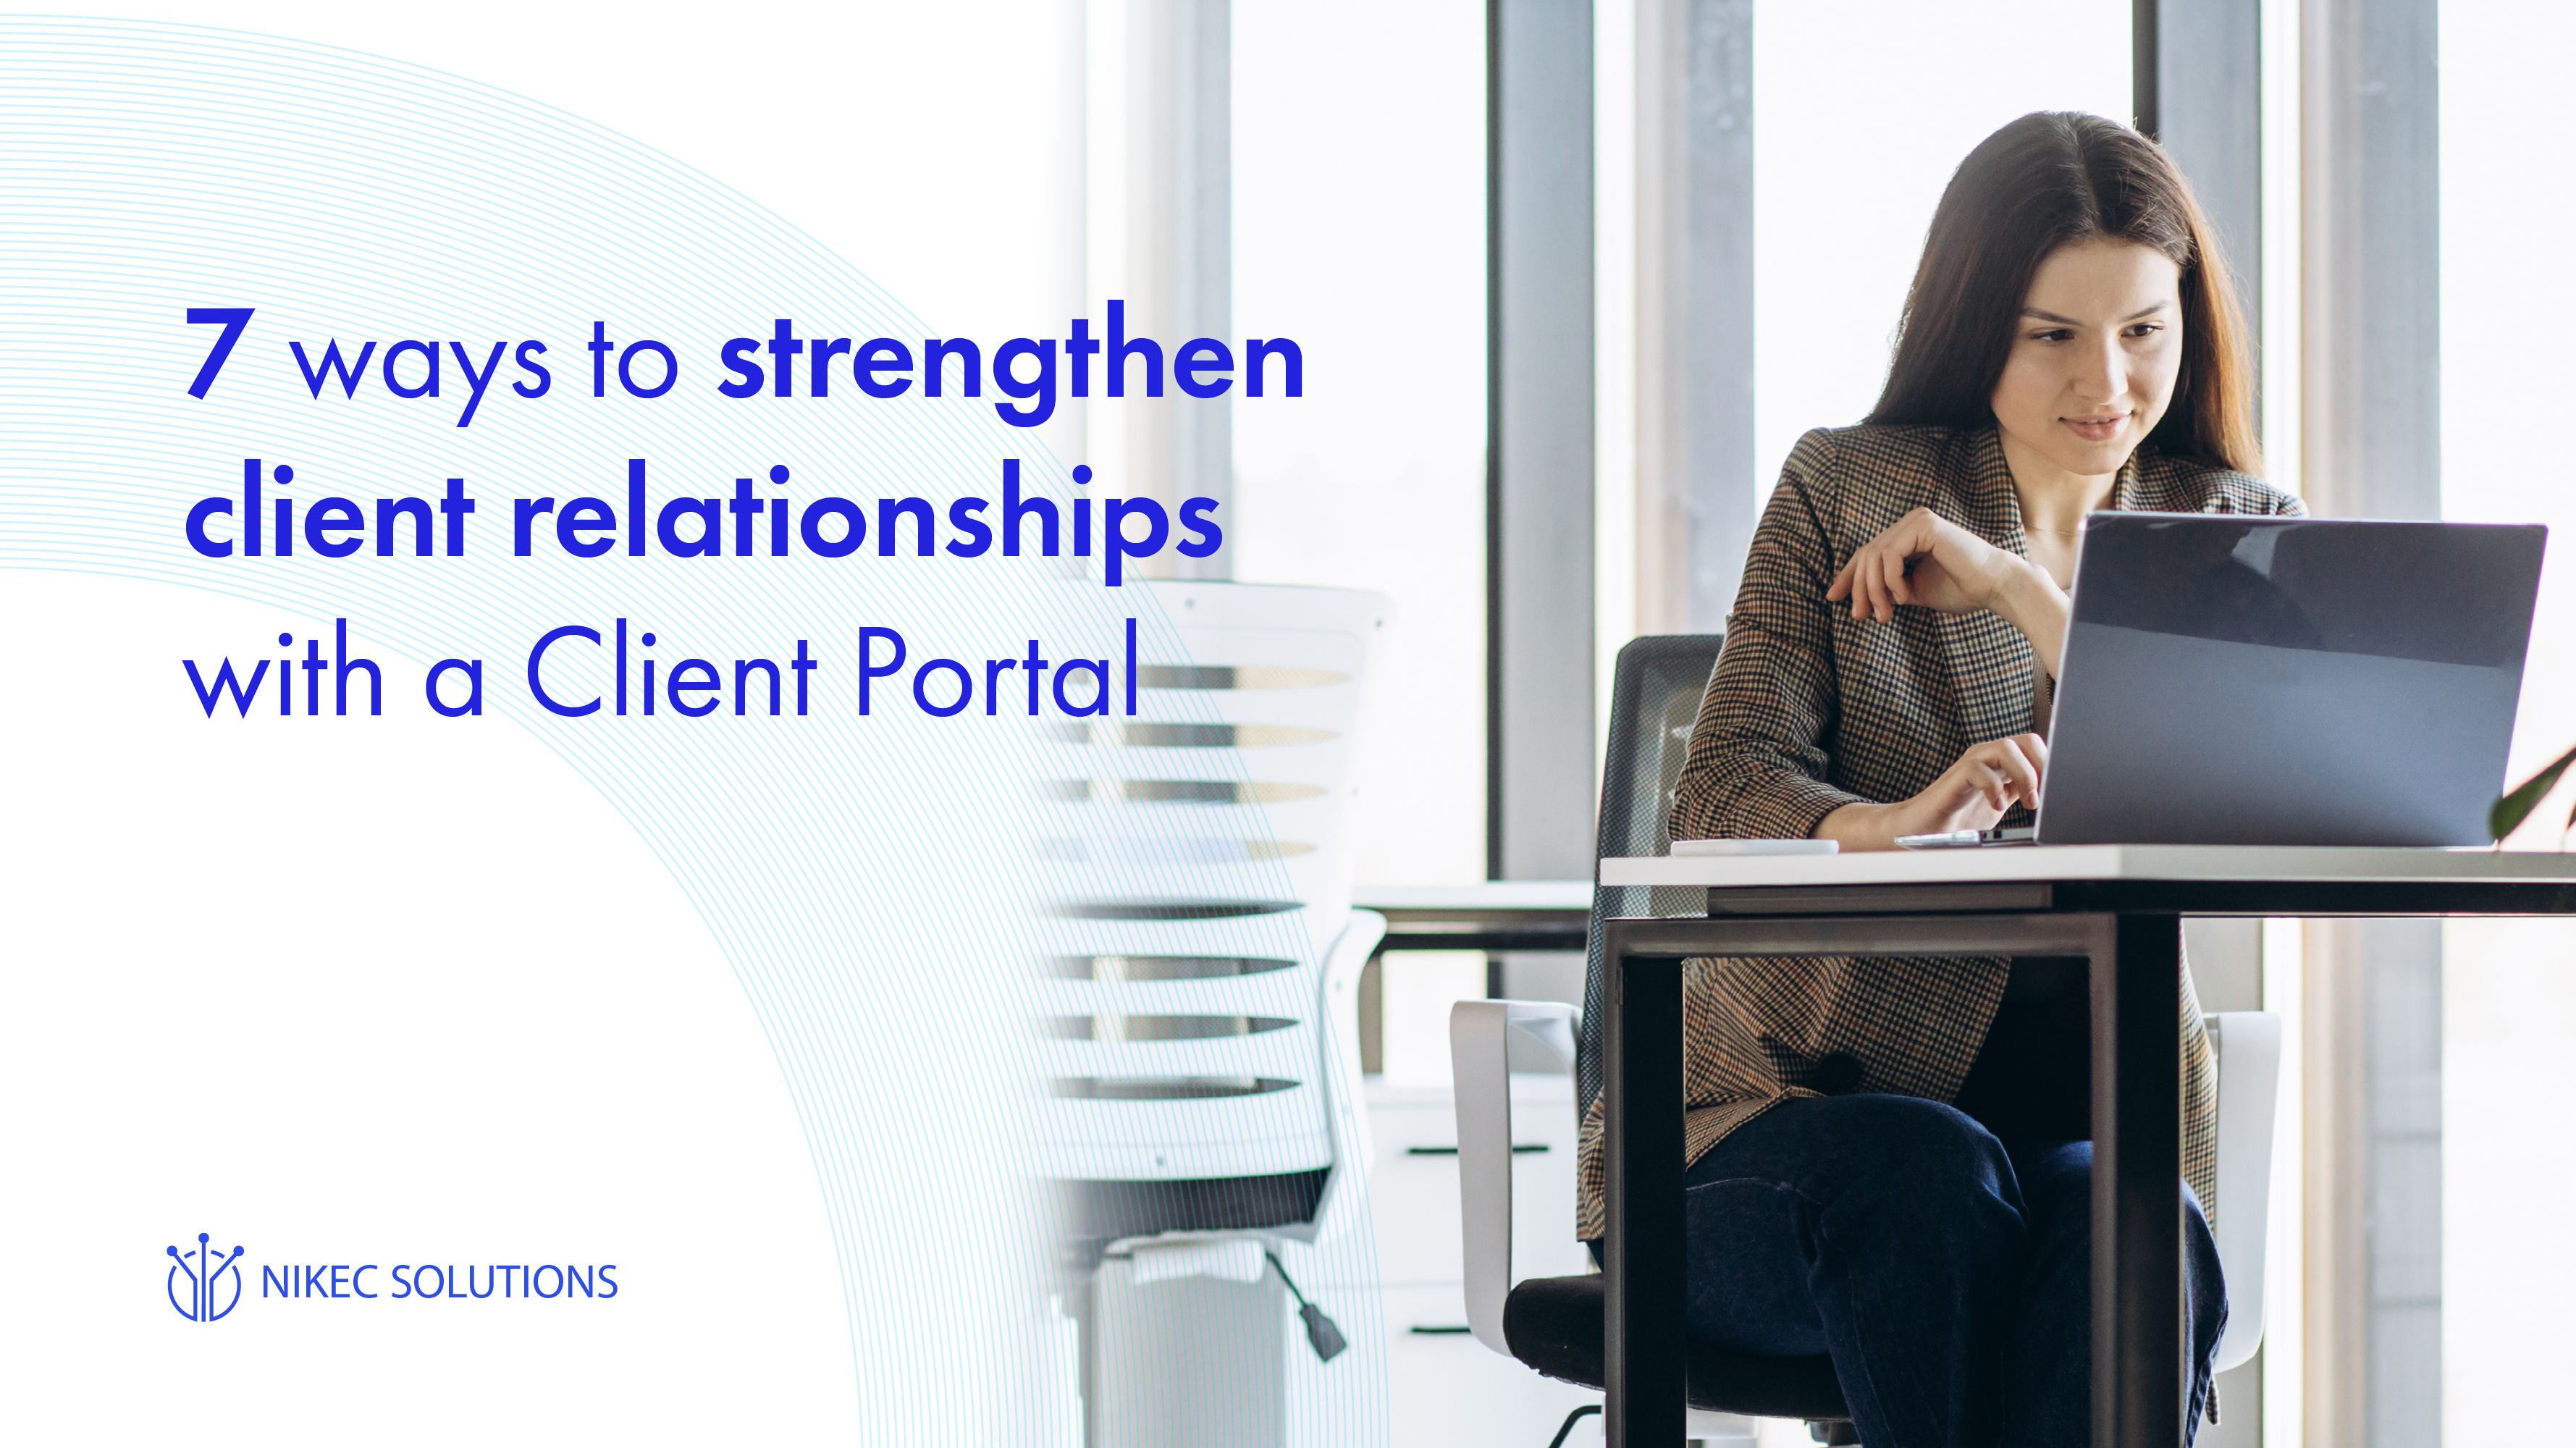 Strengthen client relationships, focus energy on getting closer to them and what could happen if you don’t.